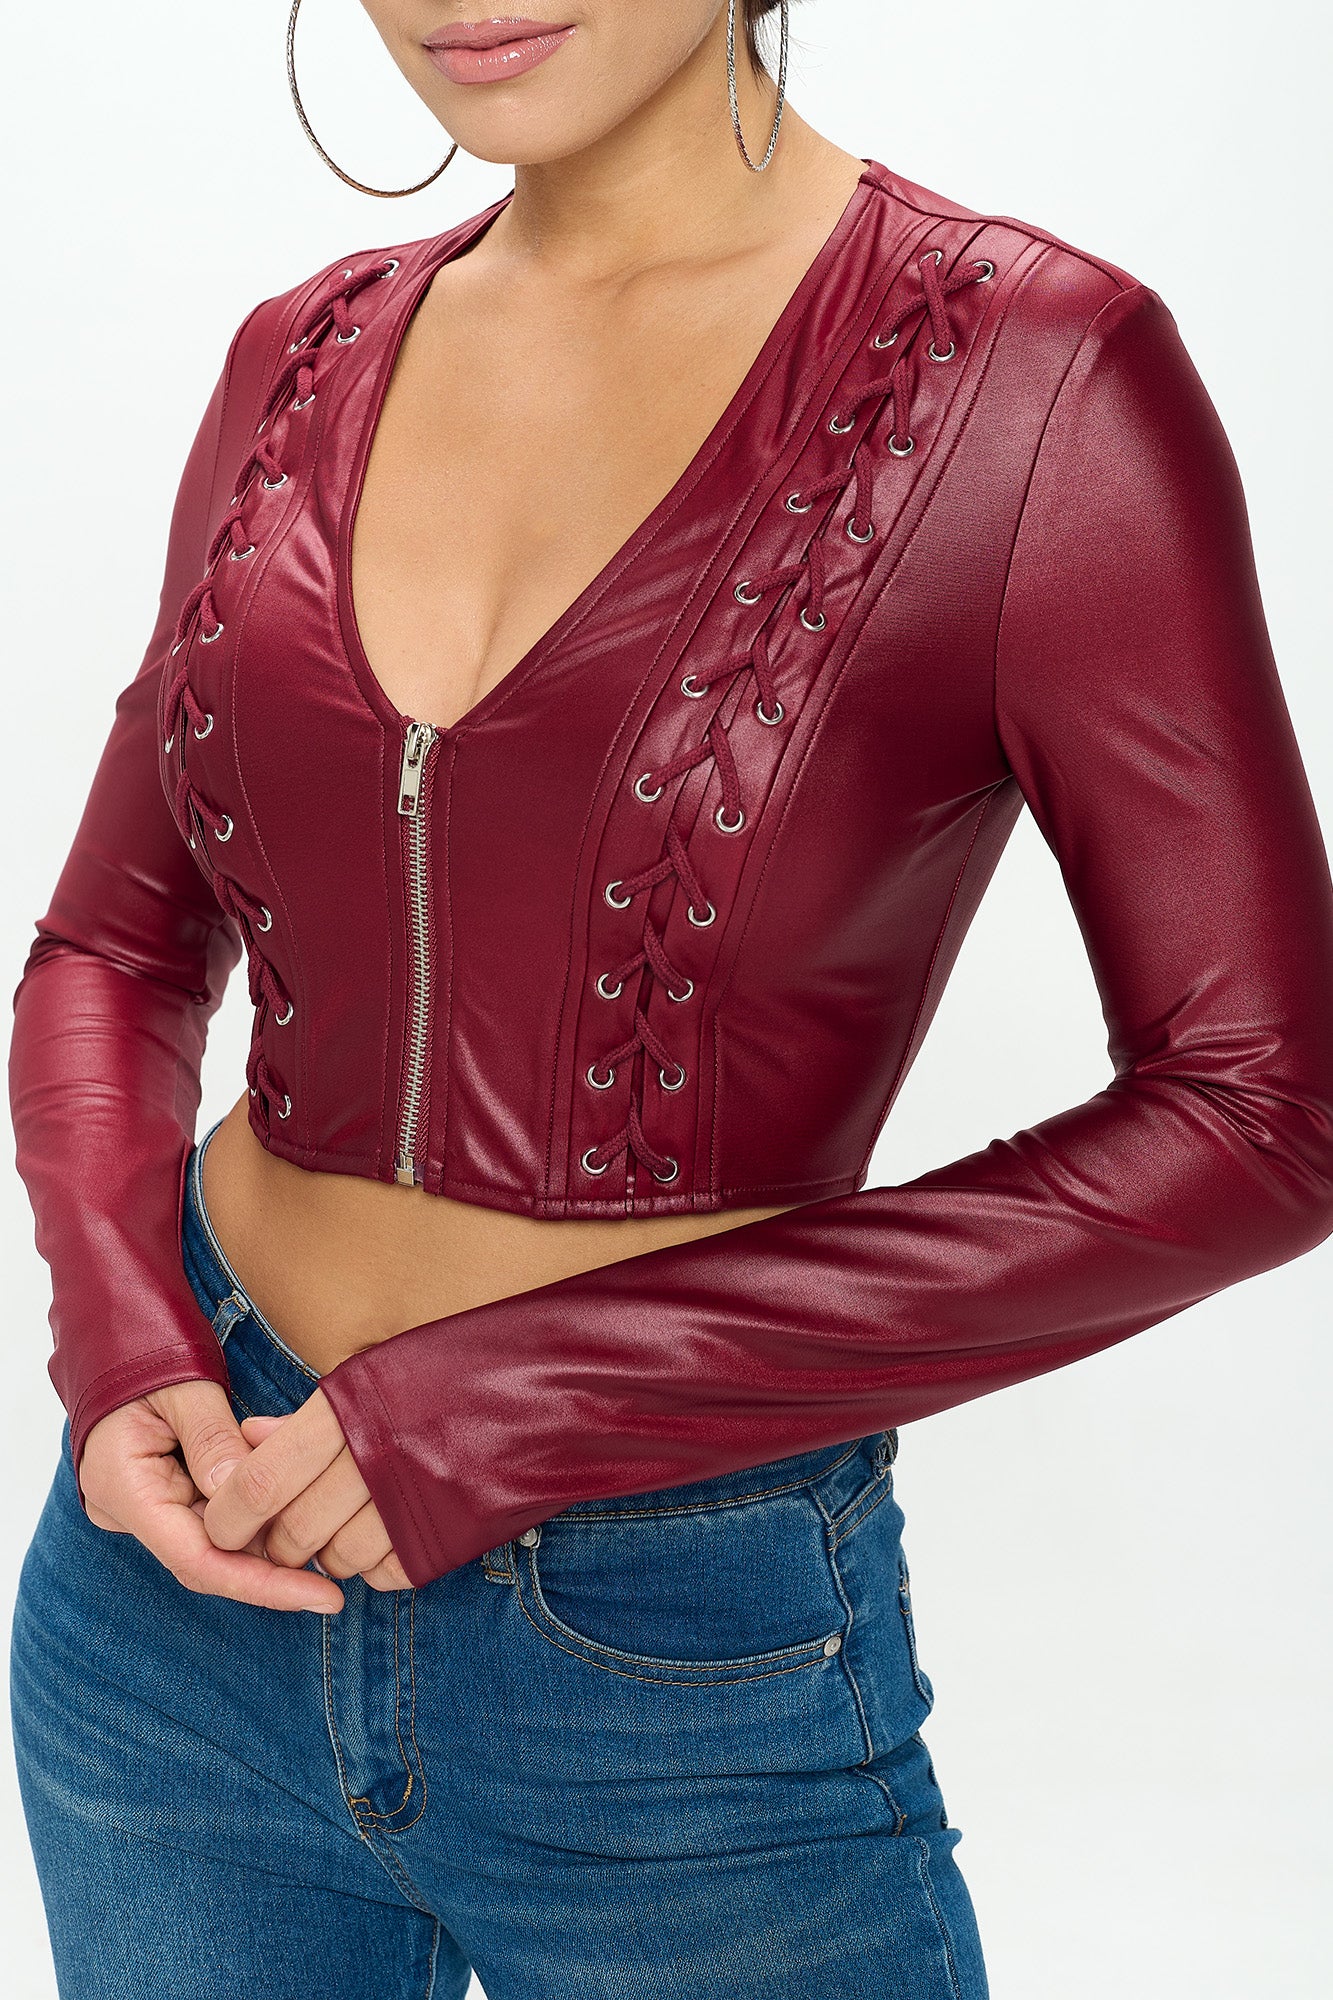 LACE-UP DETAIL ZIP UP LONG SLEEVE CROPPED JACKET